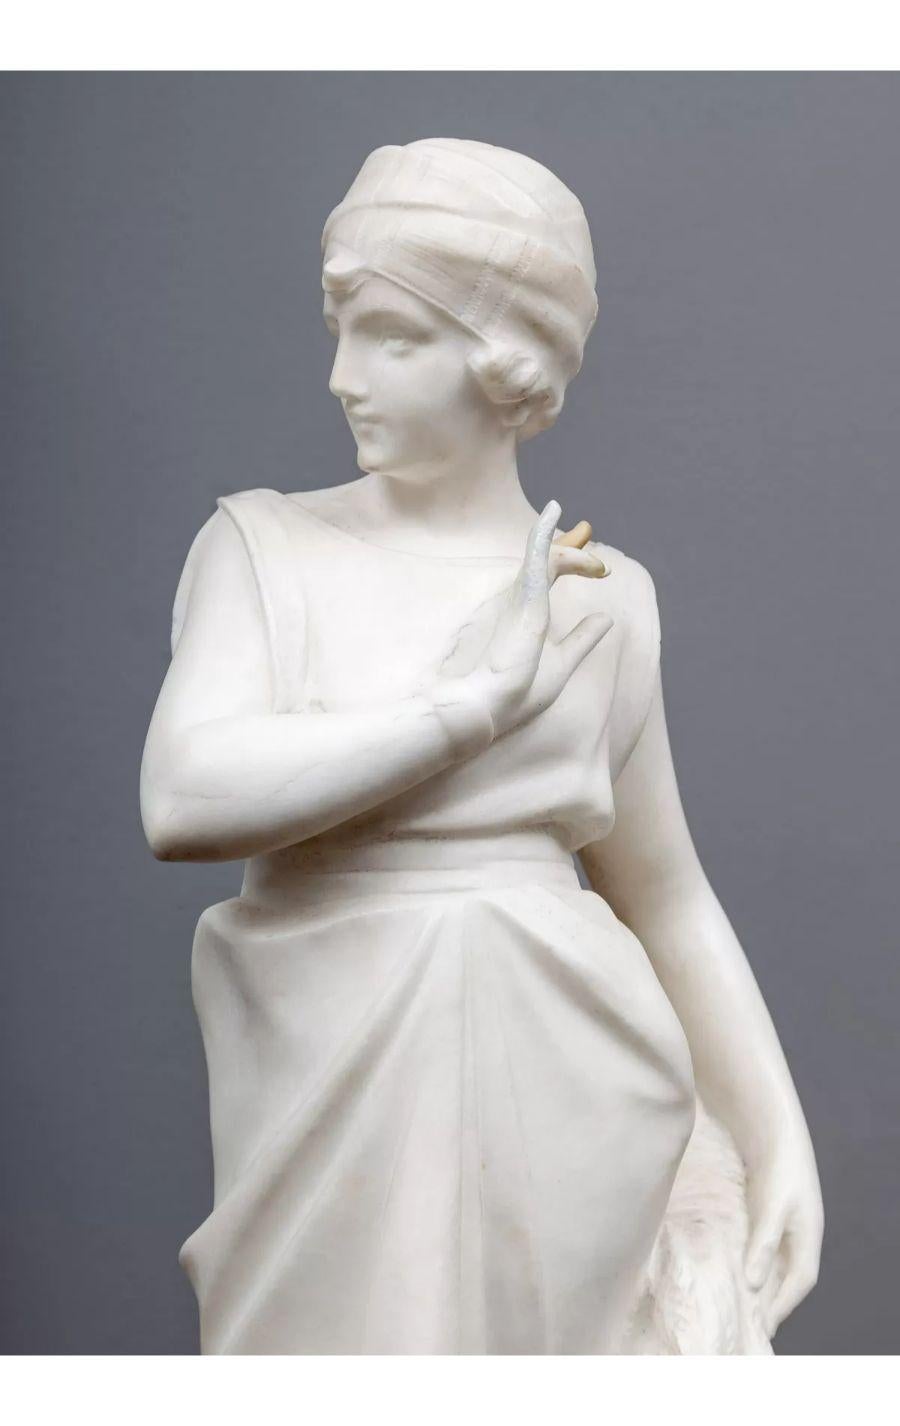 A French Art Deco carved white marble figure of a flapper girl.

Beautifully carved and highly detailed statue raised on a Panozza marble base.

Additional information:
Measurements:
Width: 7